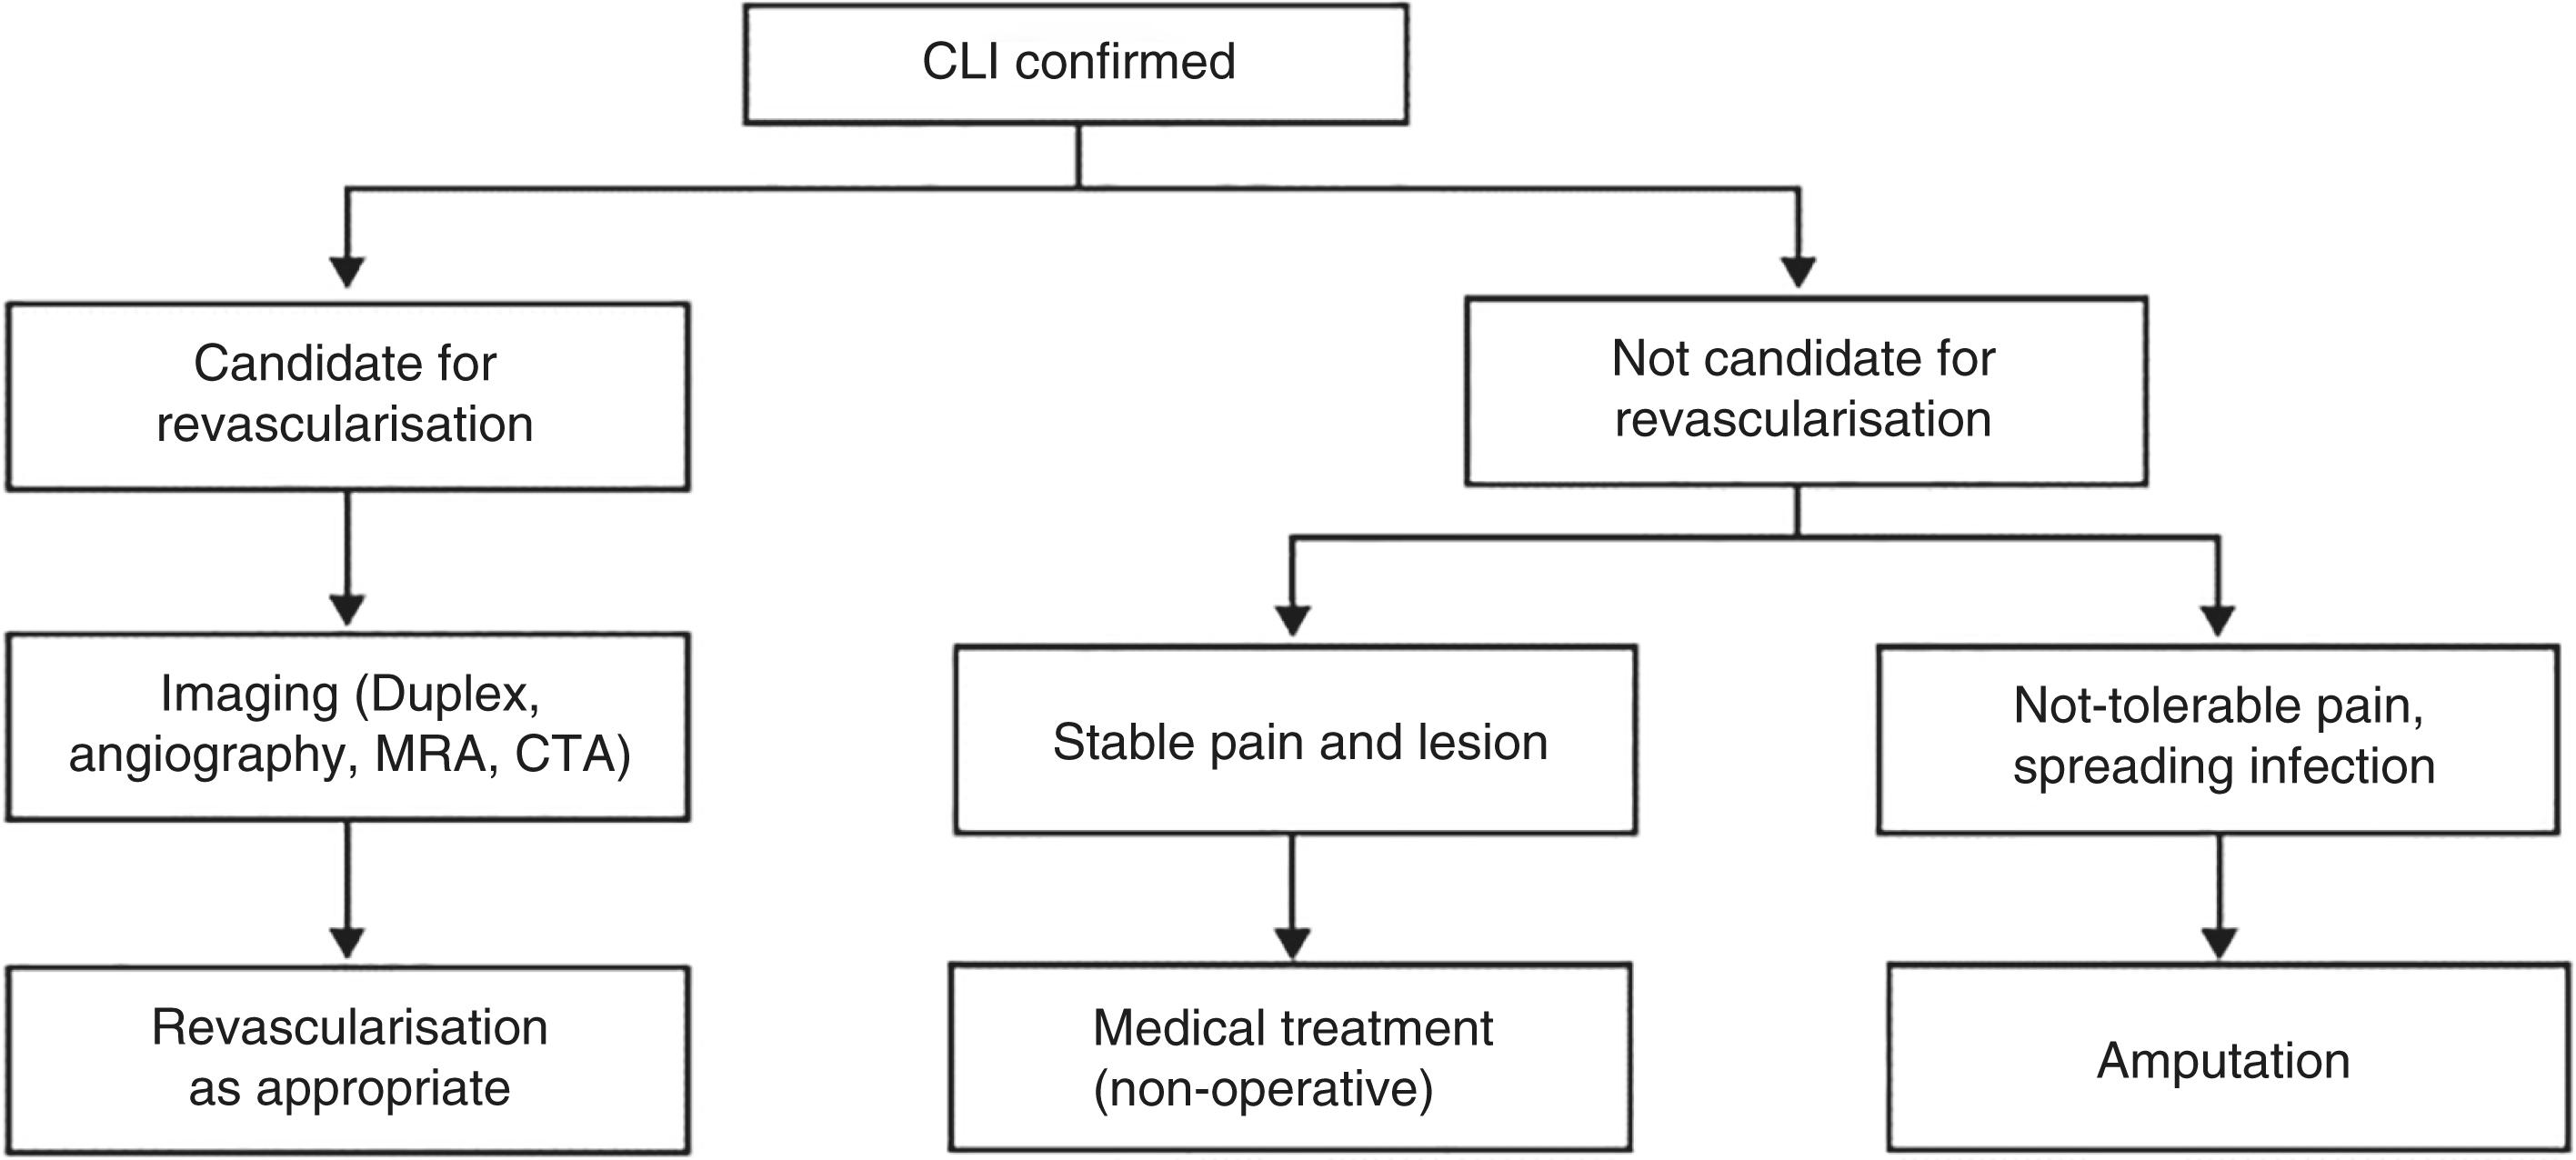 Figure 6.1, Algorithm for management of a patient with critical limb ischemia. CLI , Critical limb ischemia; CTA , computed tomographic angiography; MRA , magnetic resonance angiography.